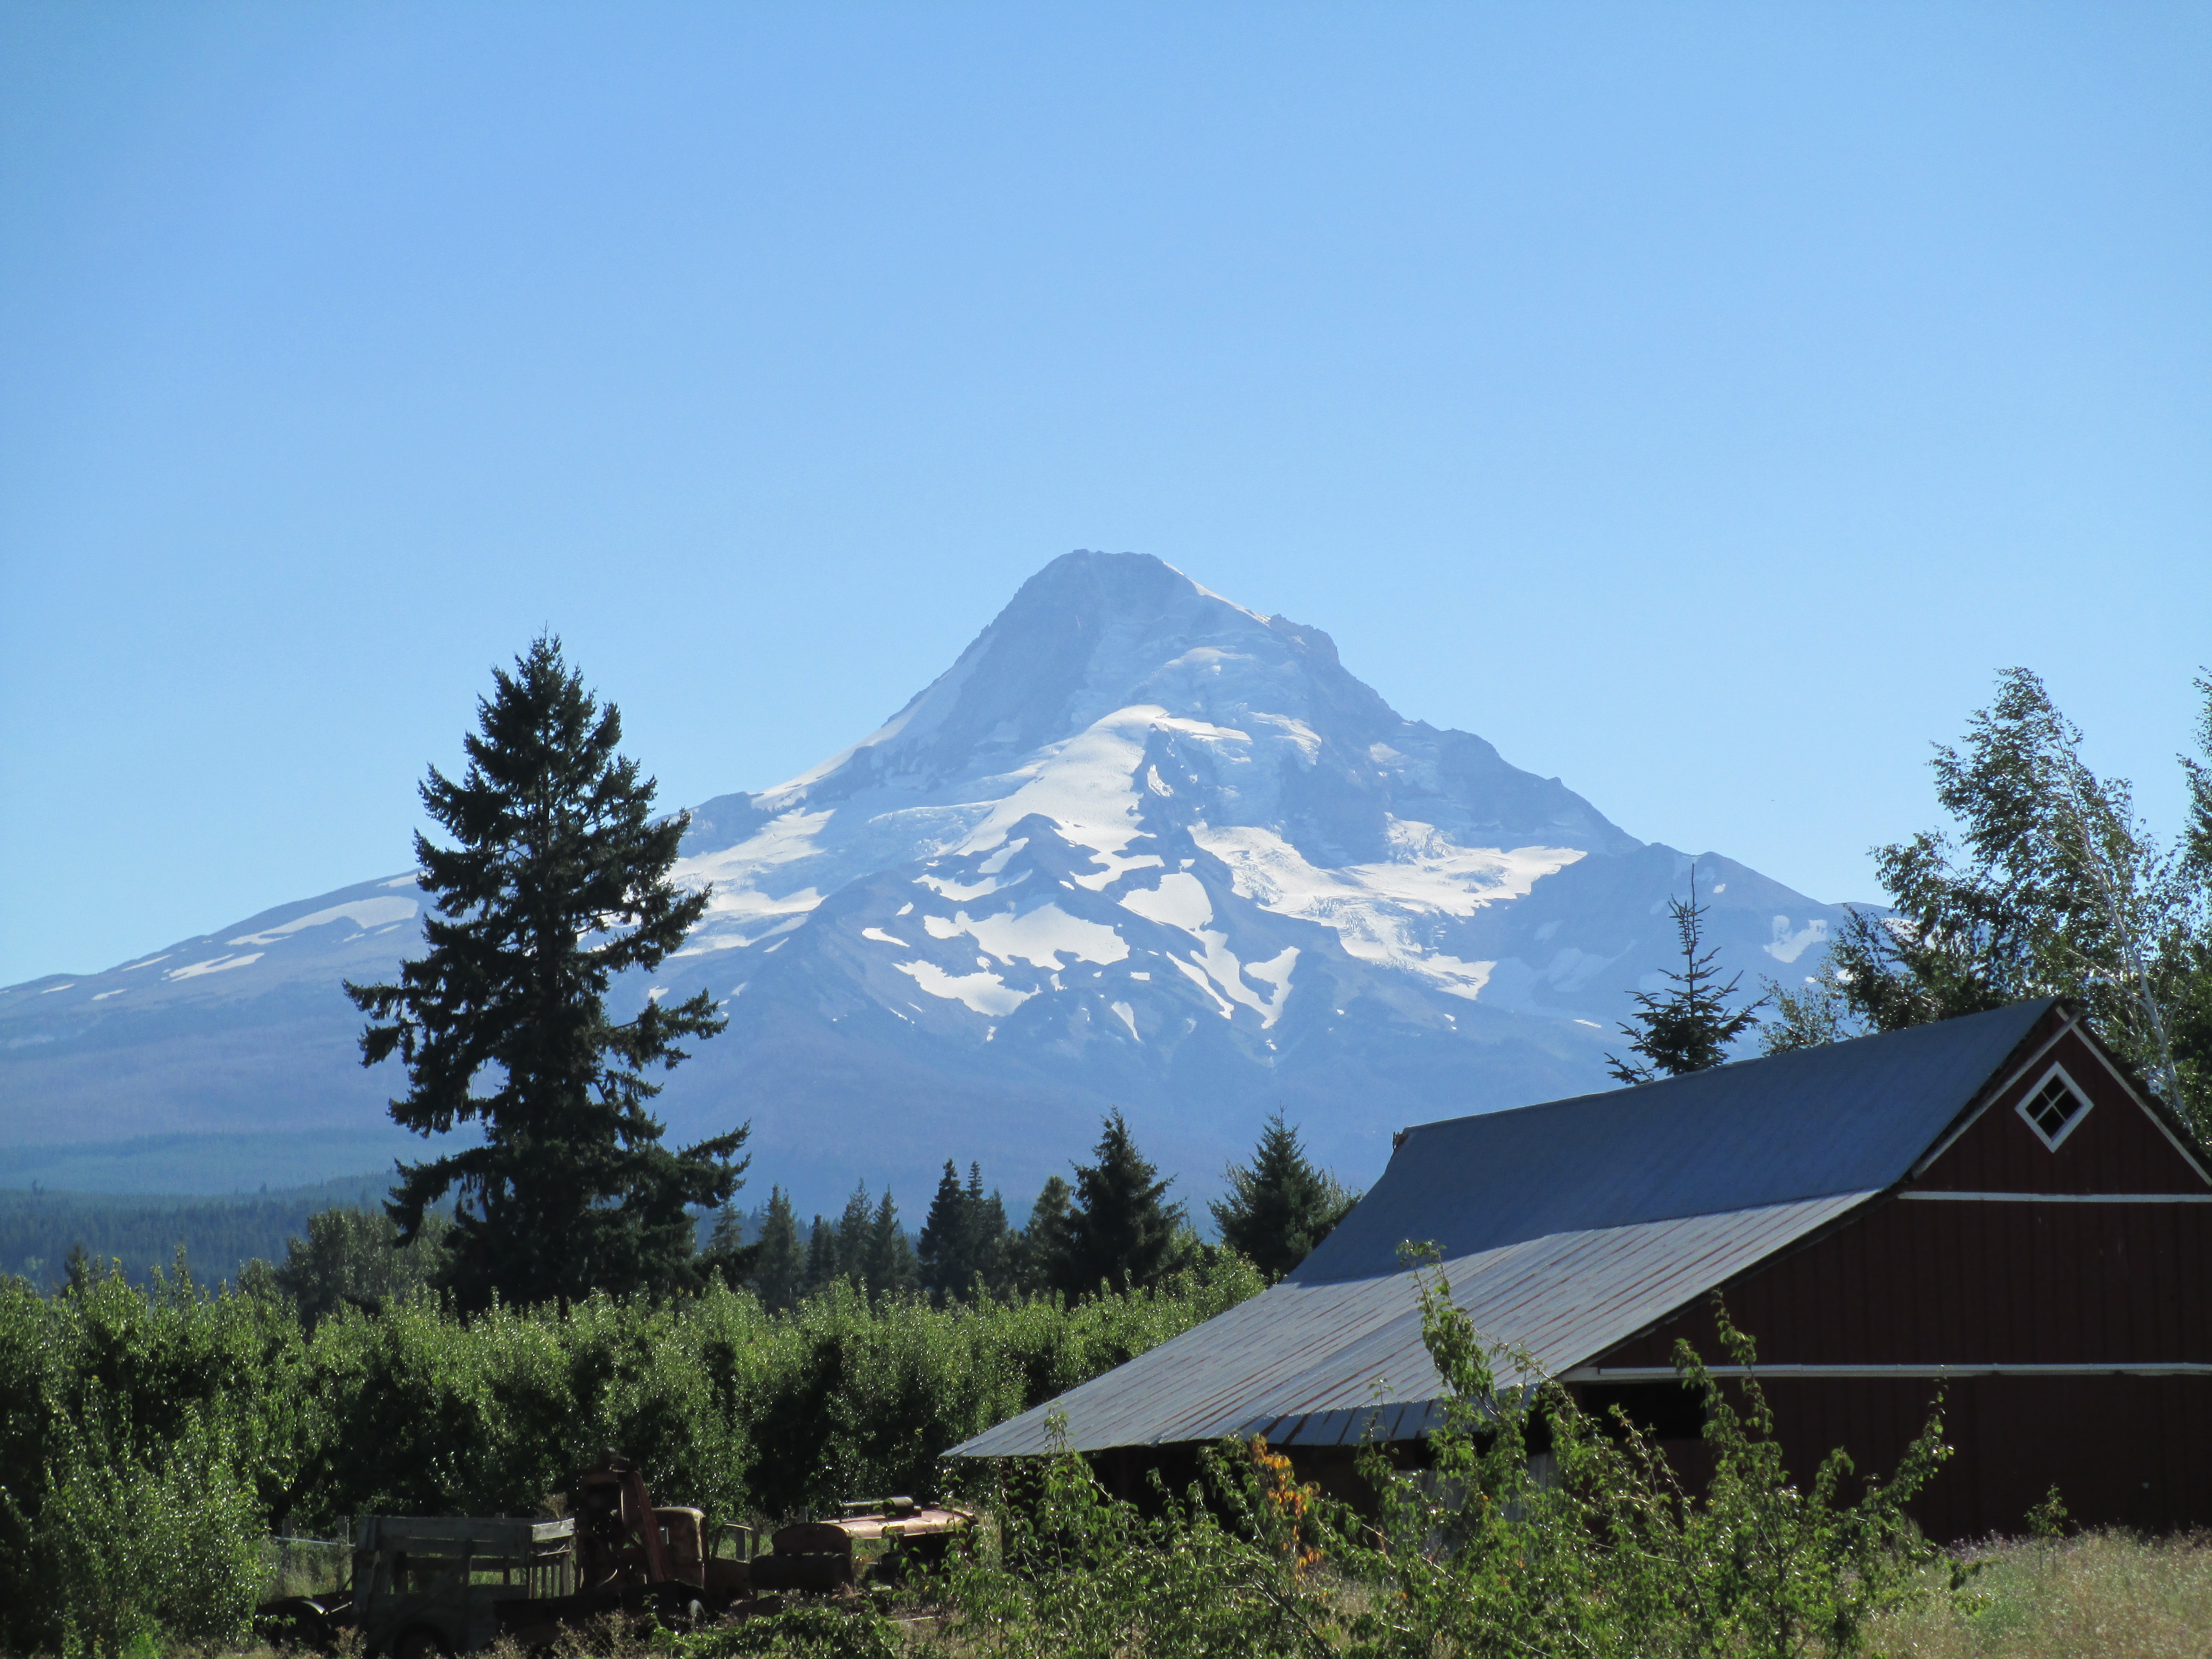 View of Mt. Hood from Solera Brewery